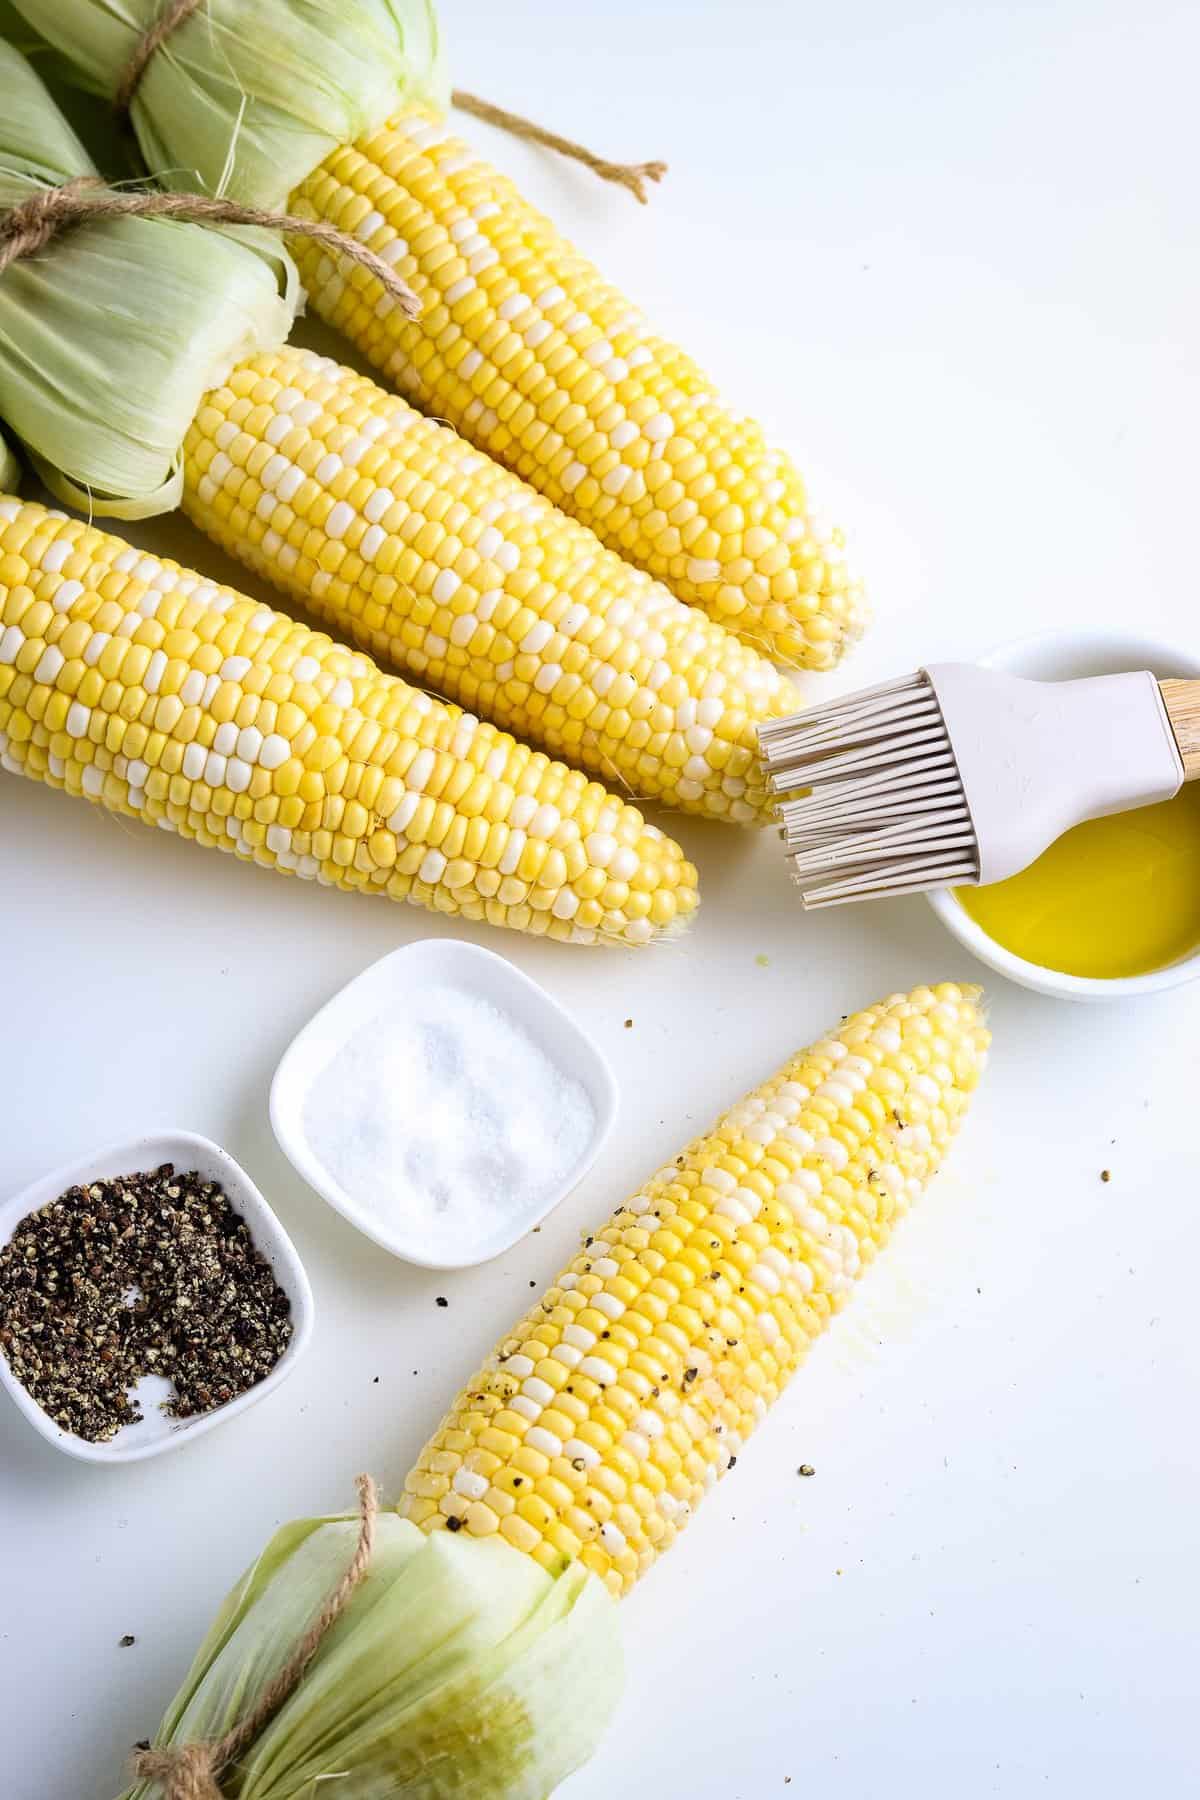 Husked corn on the cob with salt pepper and oil